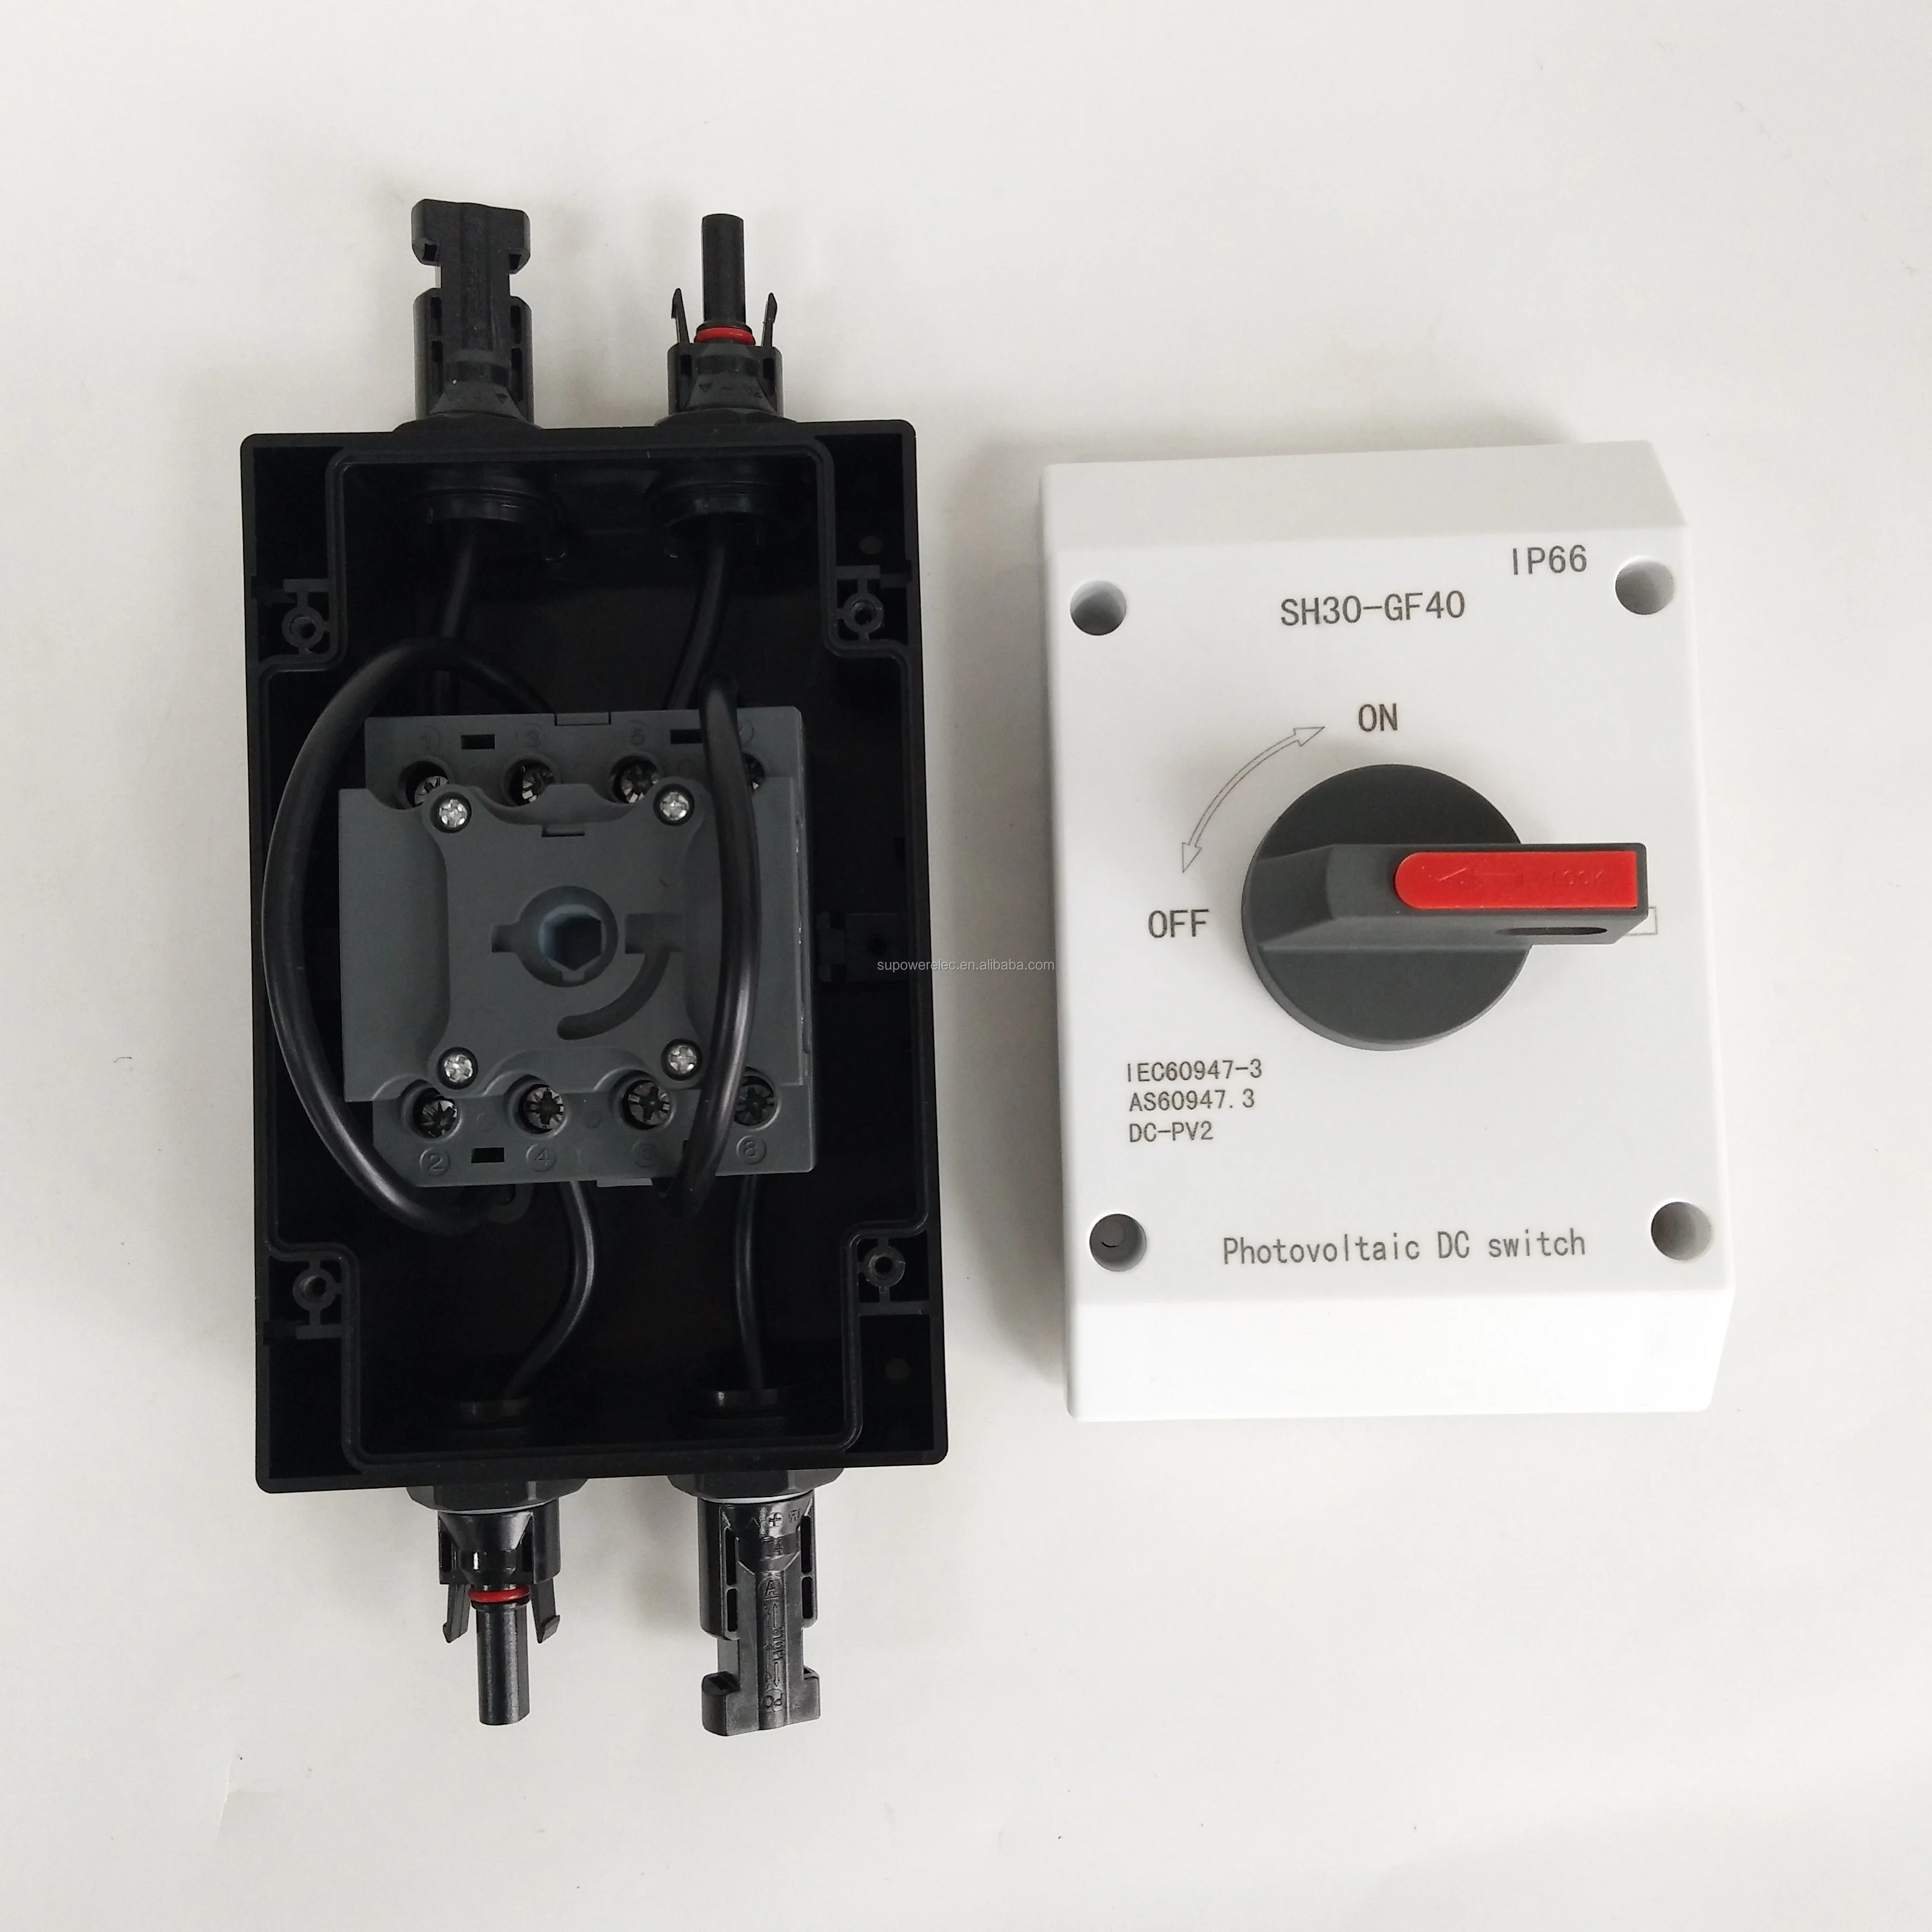 Waterproof IP66 High performance Solar DC 1500V 40A PV Photovoltaic Isolator Isolating Switch with 2 pairs SOLAR Connectors